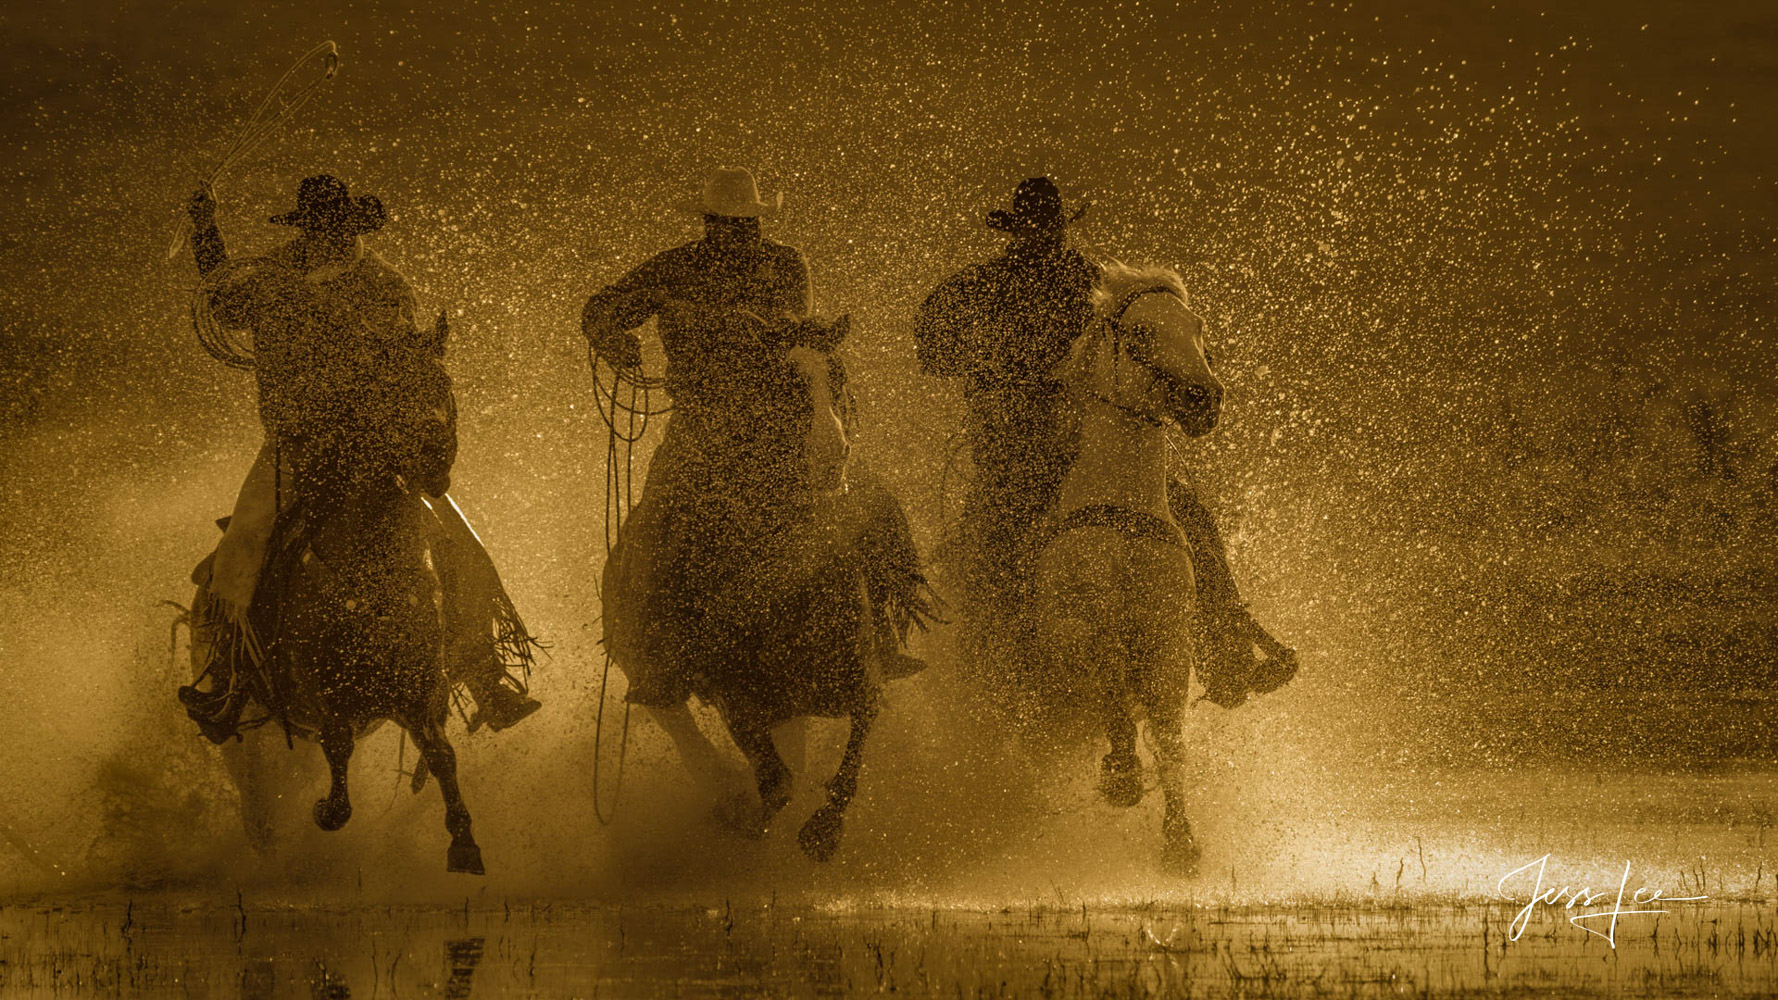 Fine Art Limited Edition Photography of Cowboys, Horses and life in the West. Cowboys find a good way to cool off racing through...